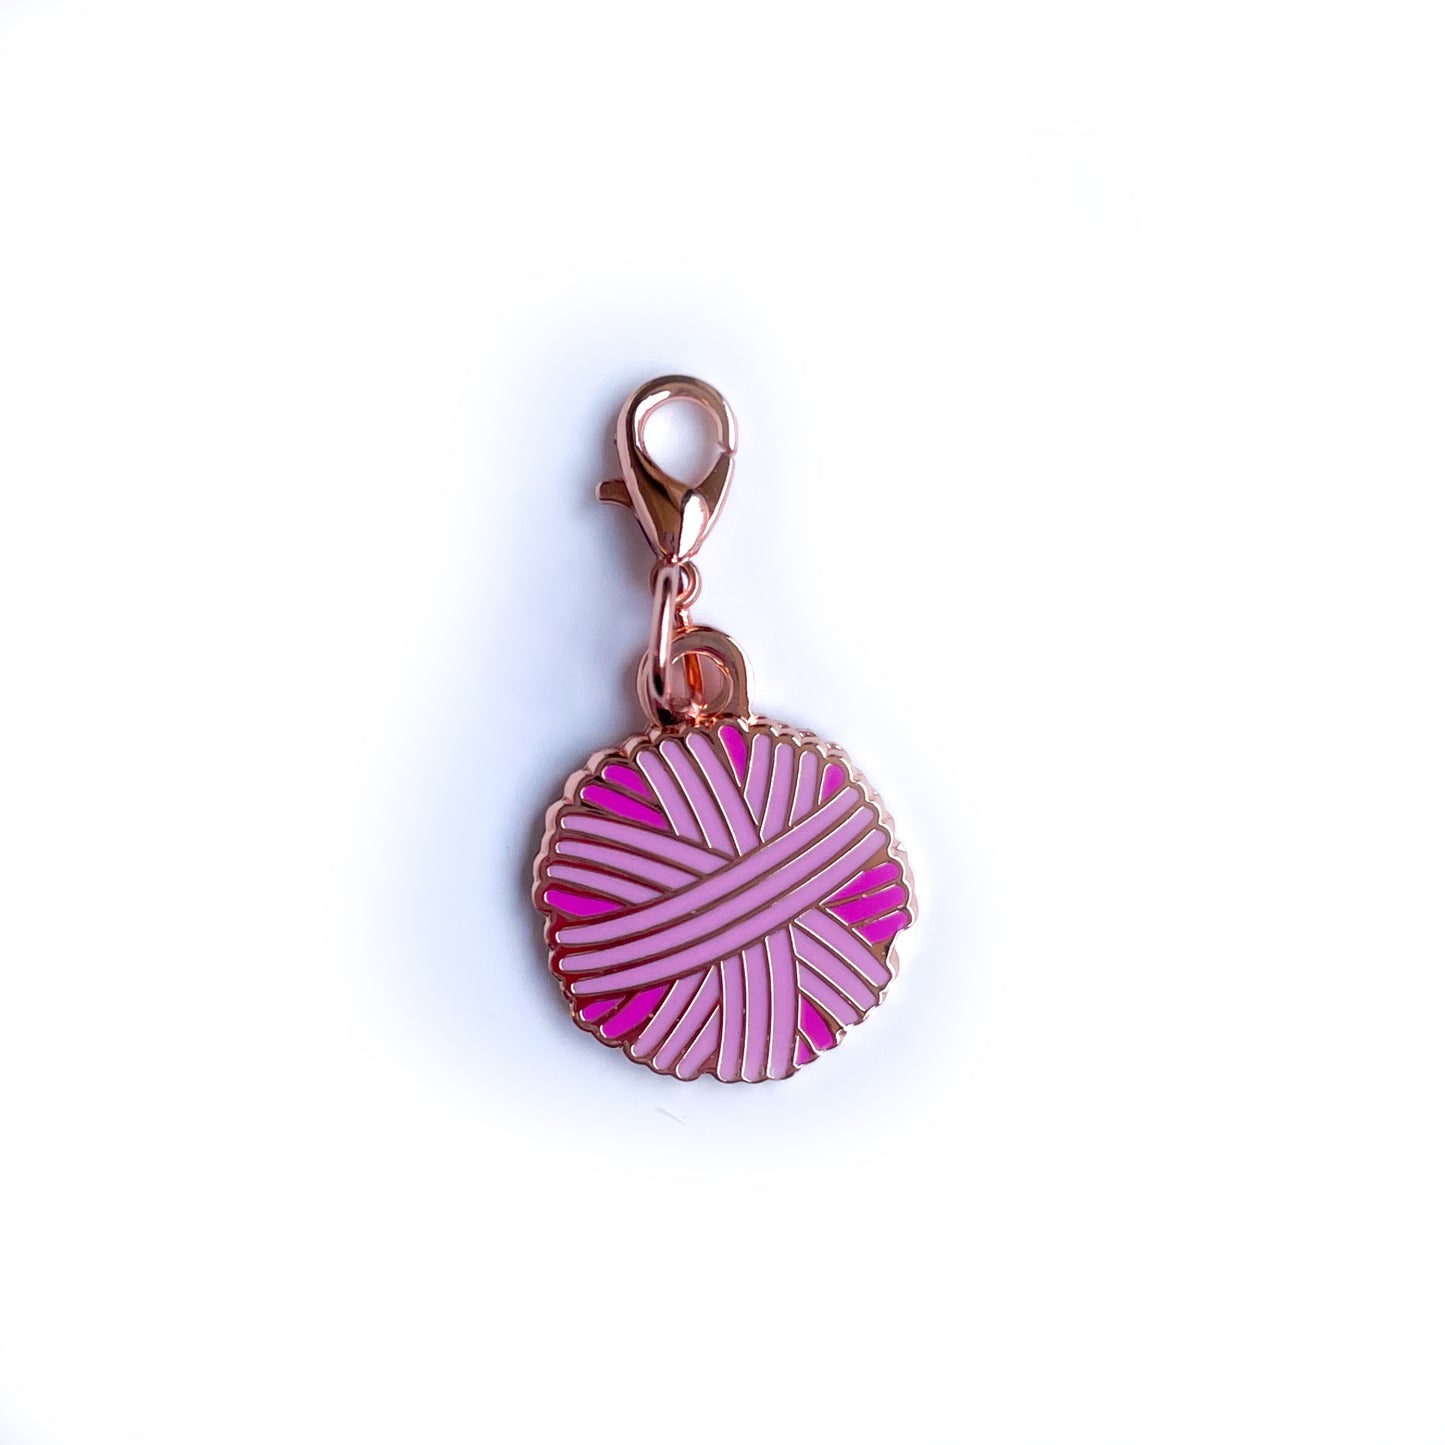 A yarn ball shaped charm in shades of pink with a lobster claw clasp. 